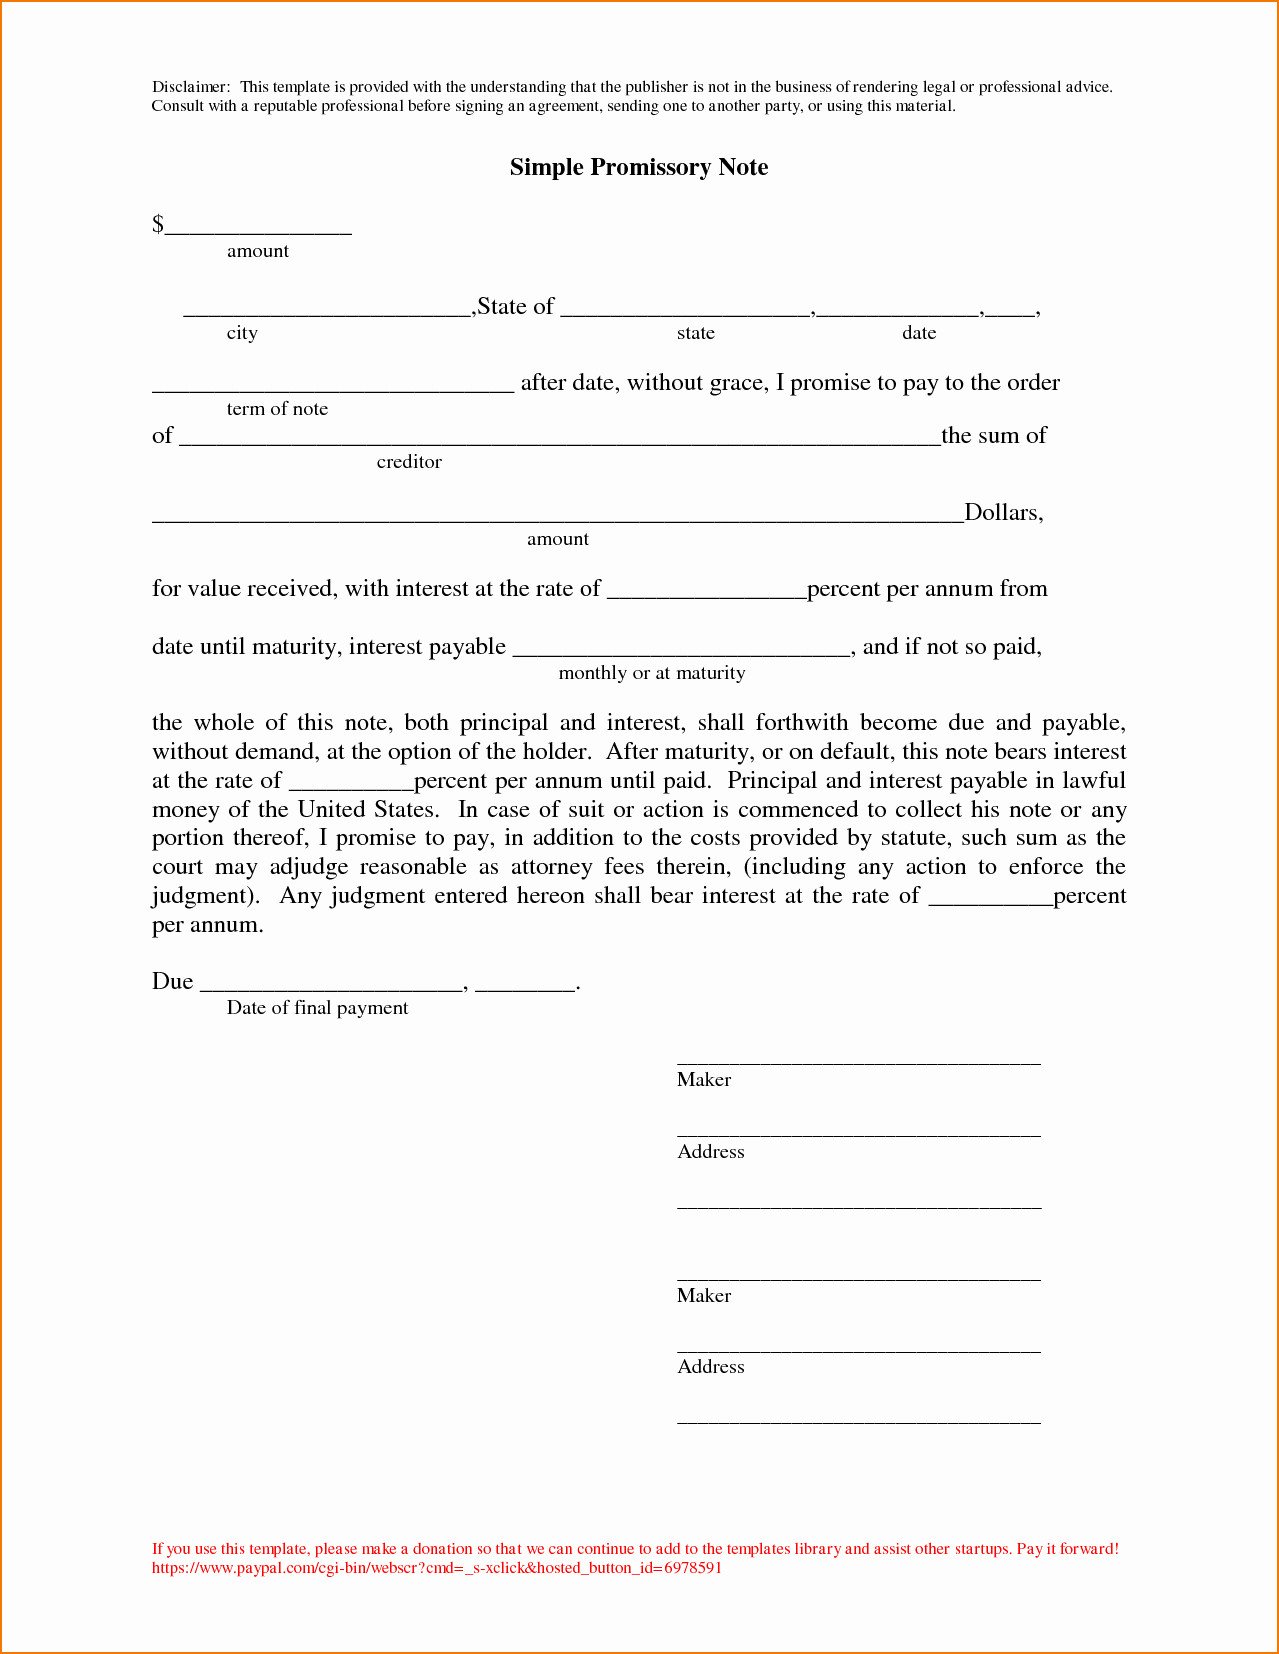 Promissory Note Template Florida 013 Best Basic Promissory Note Mughals Simple Ideas